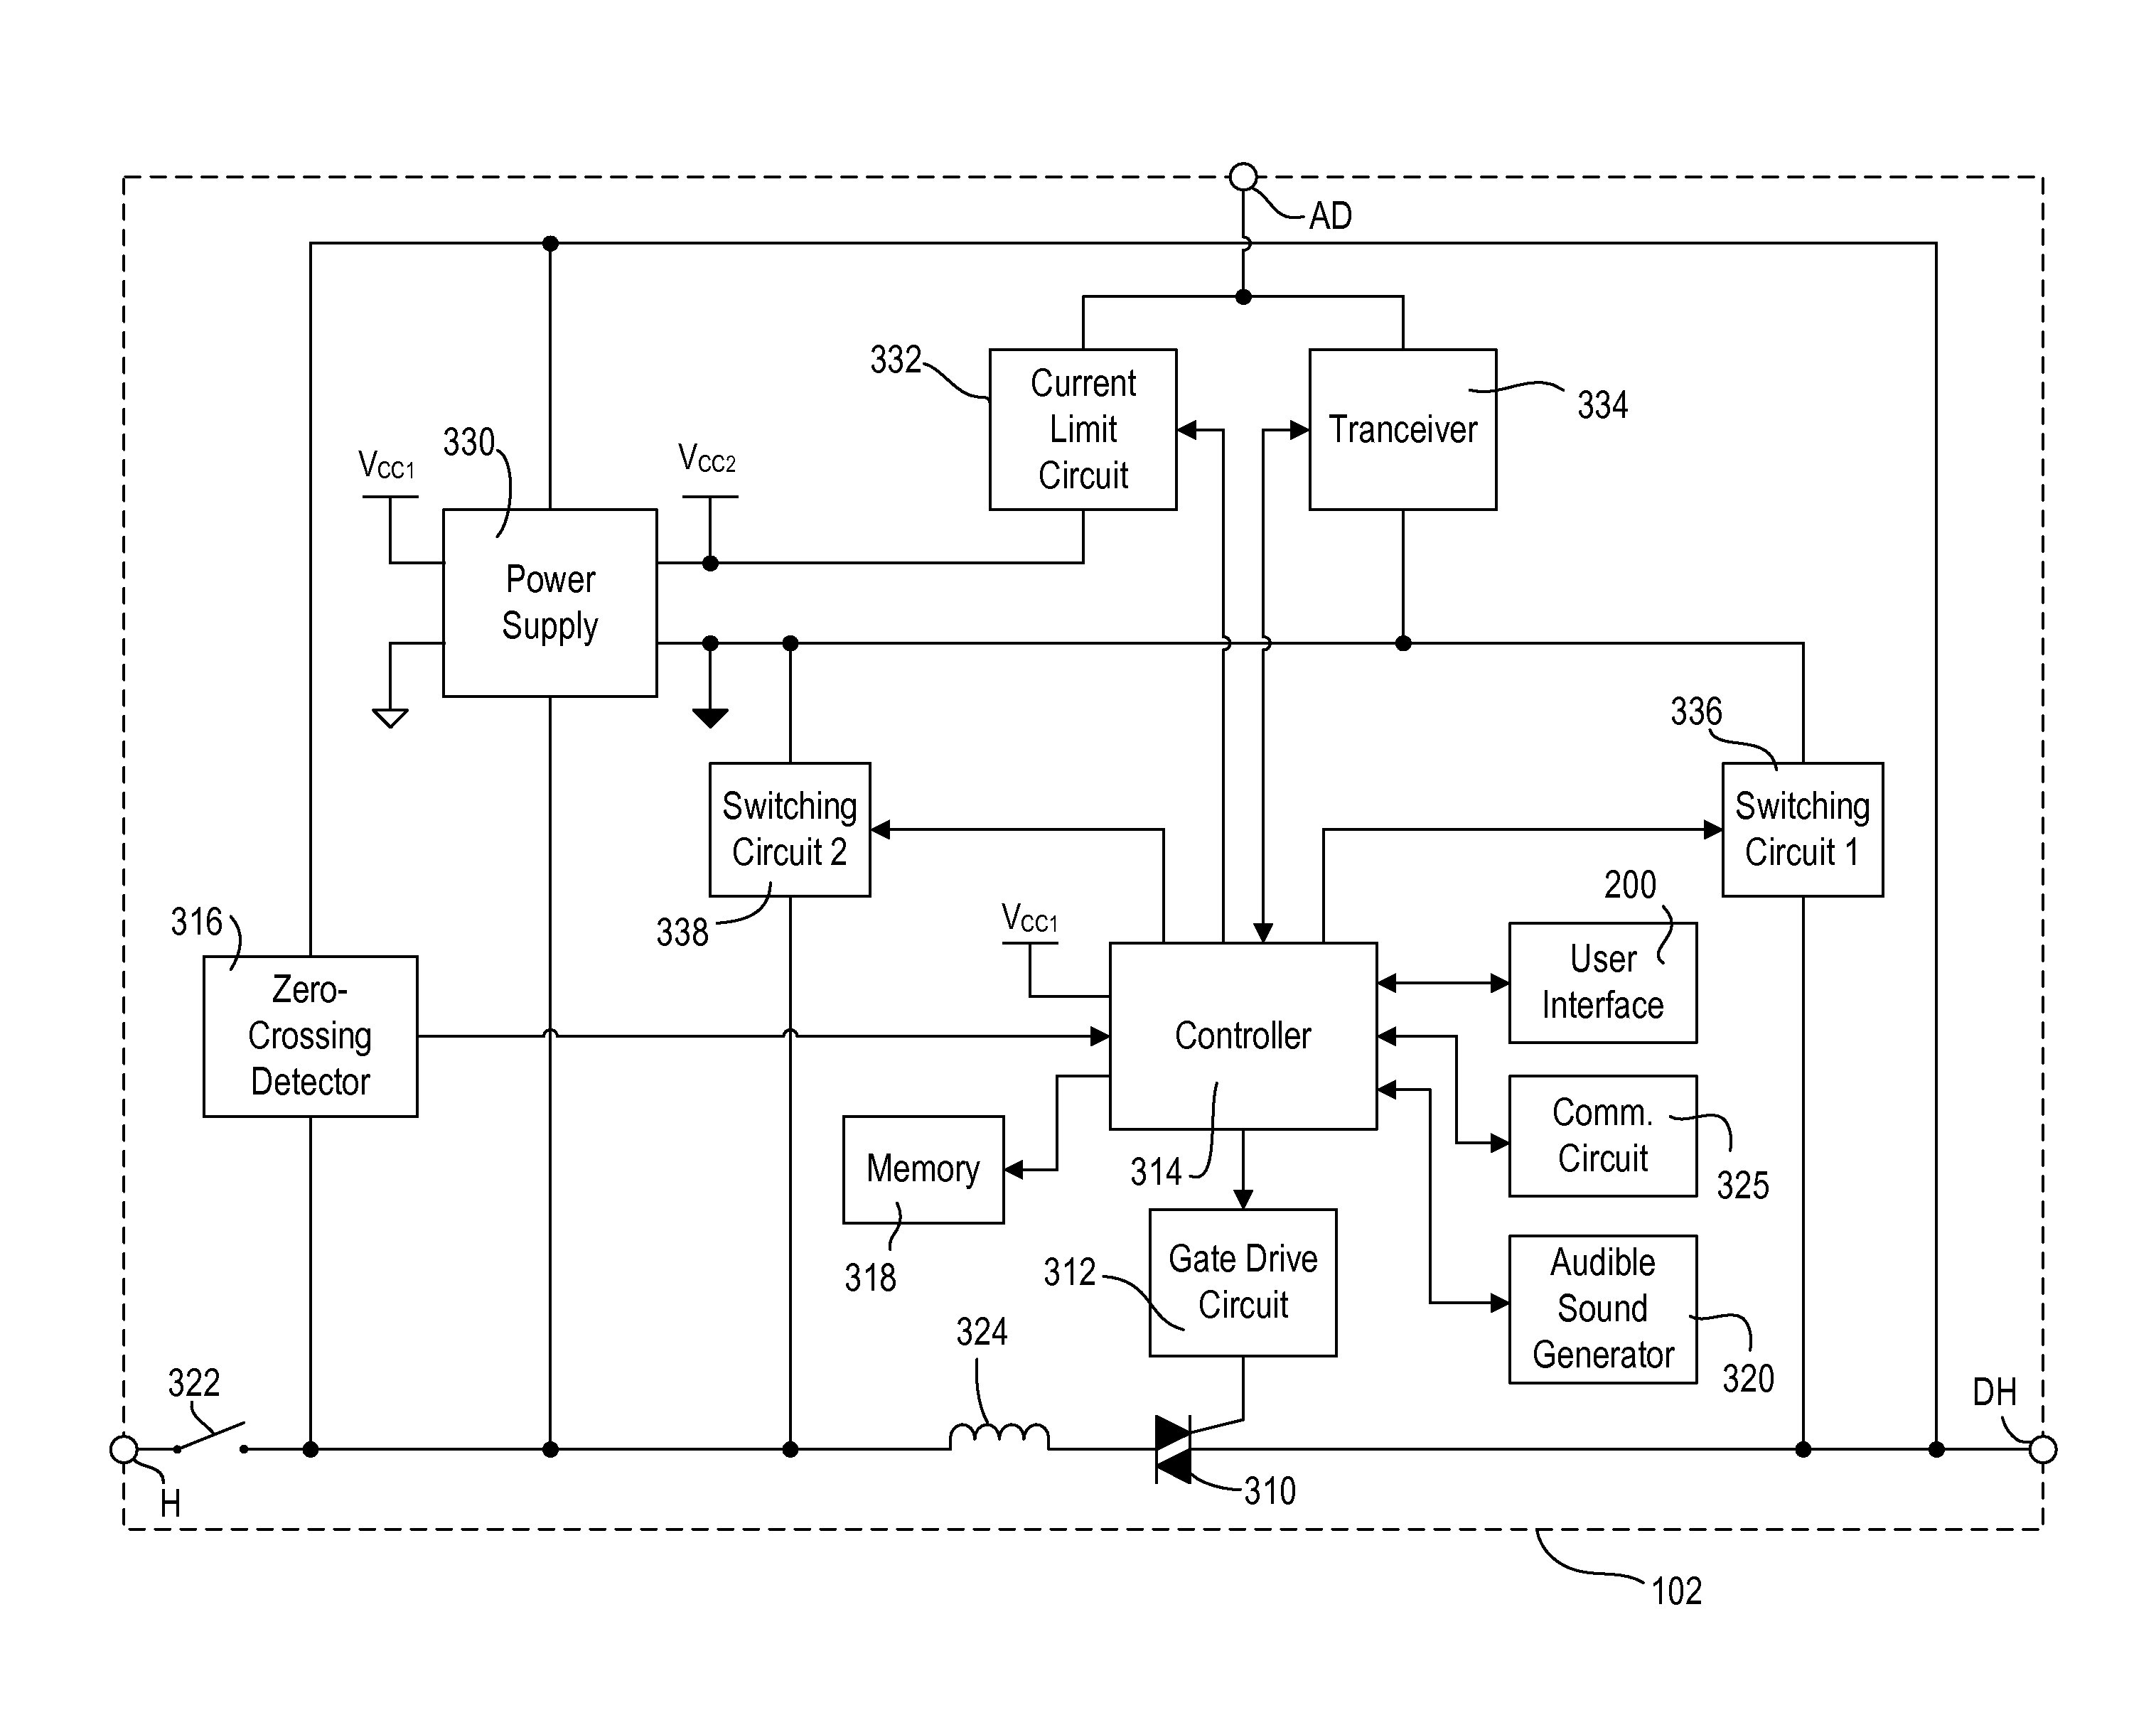 Power Supply for a Load Control Device